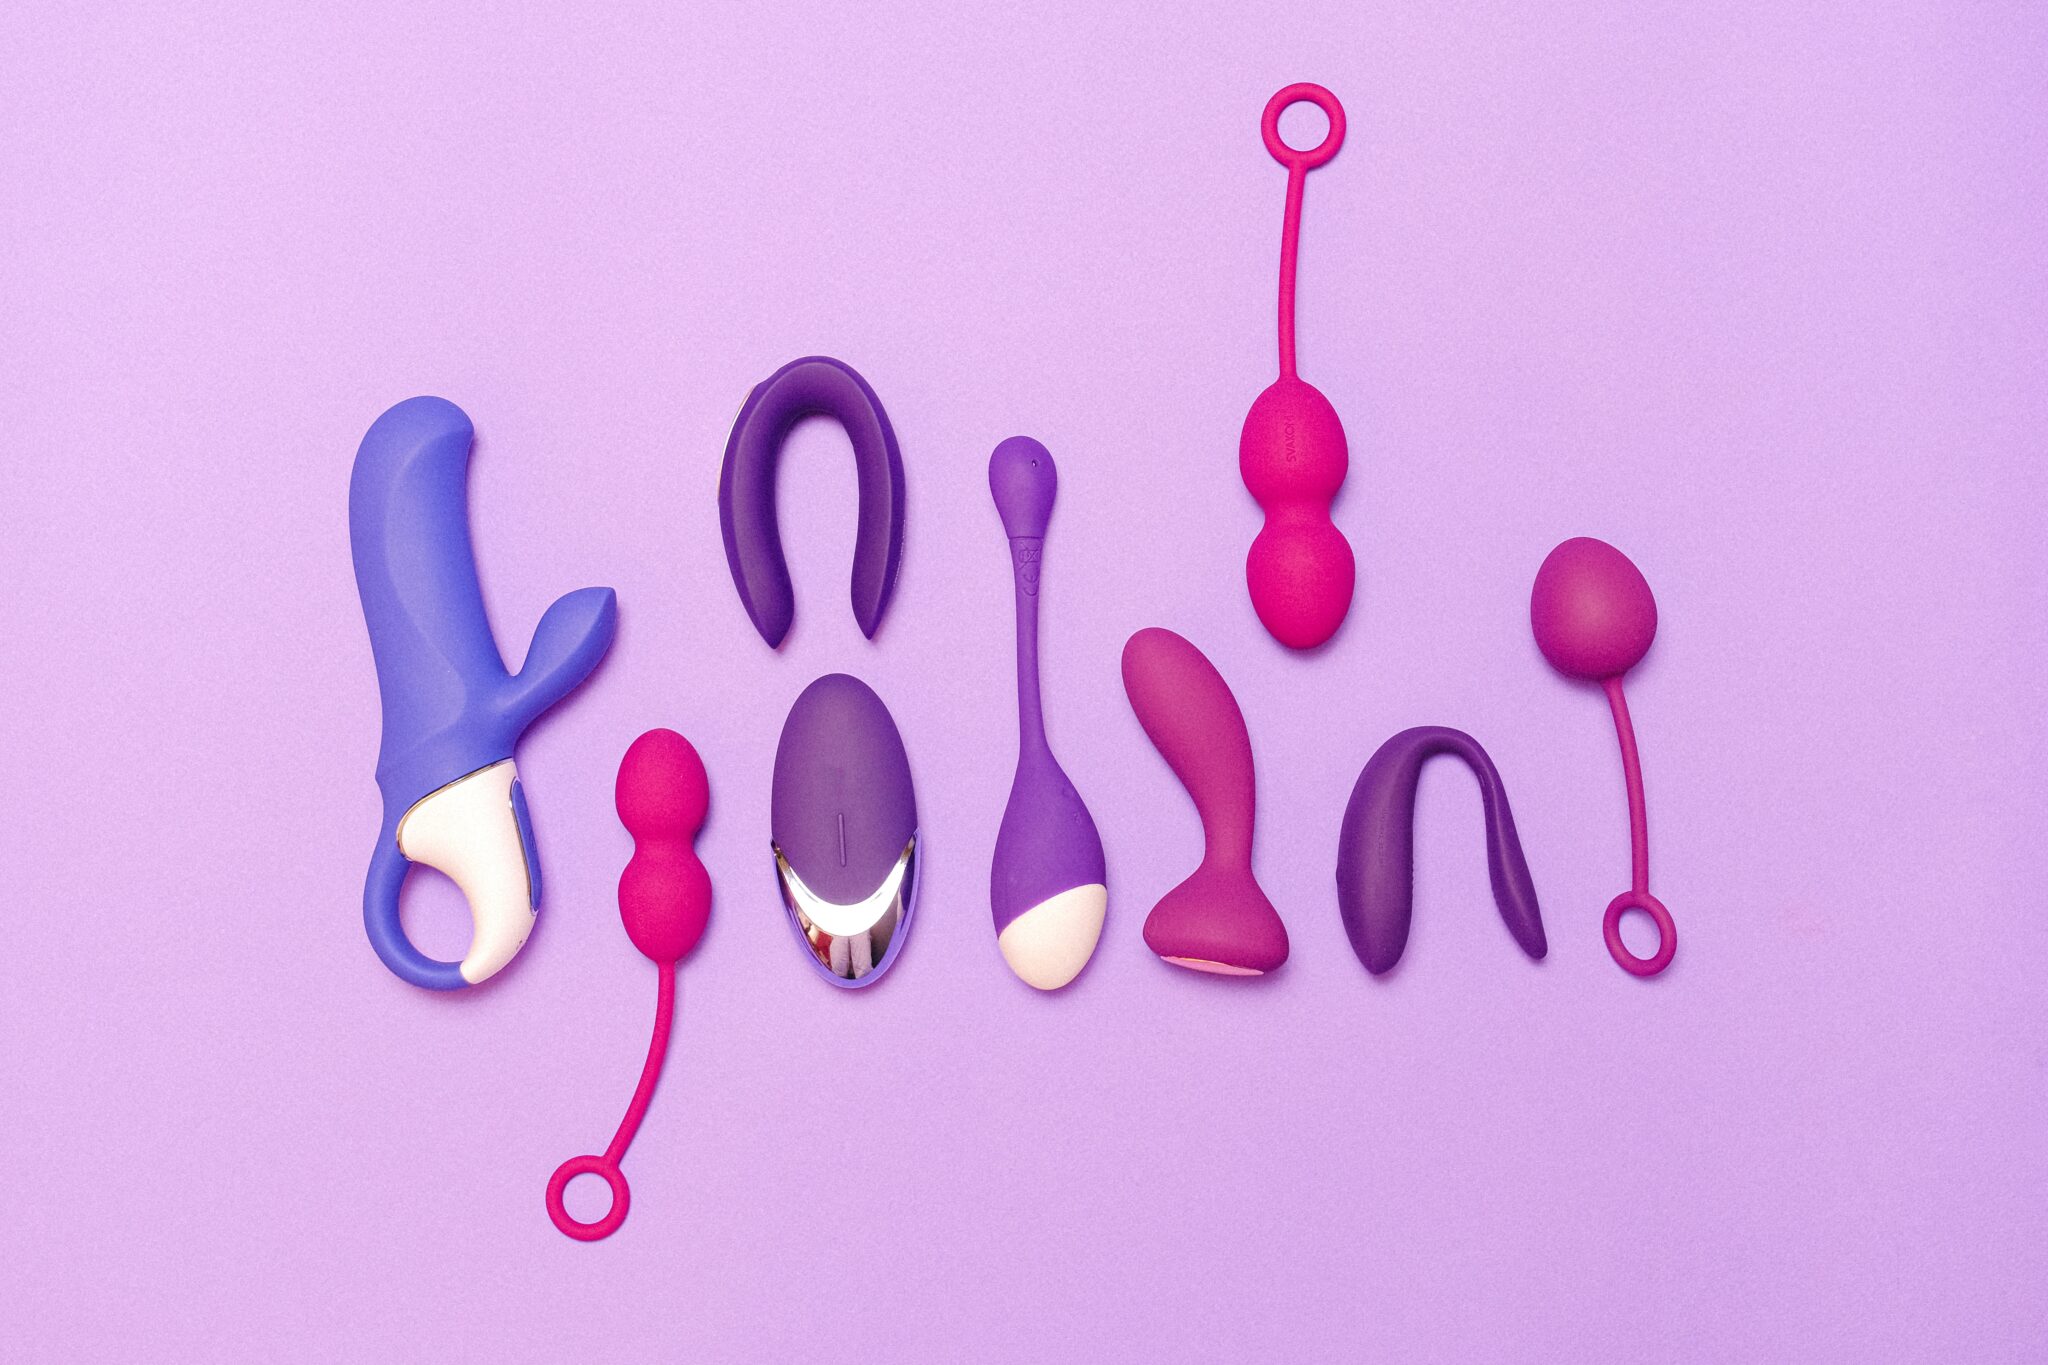 A variety of blue and purple vibrators and sex toys for women.